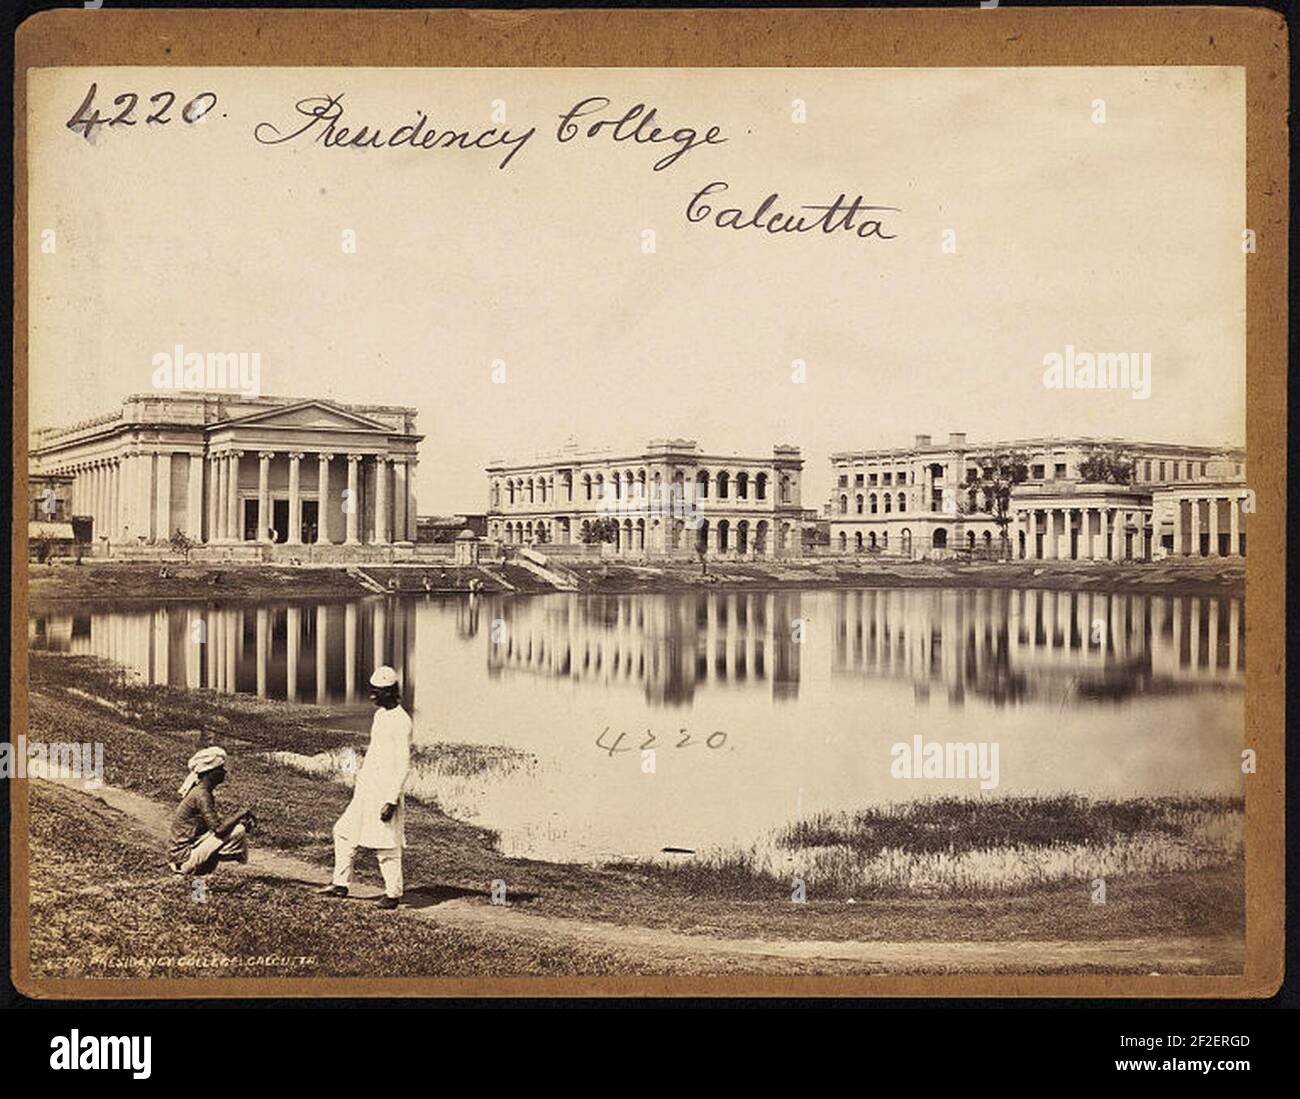 Presidency College, Calcutta by Francis Frith (1). Stock Photo